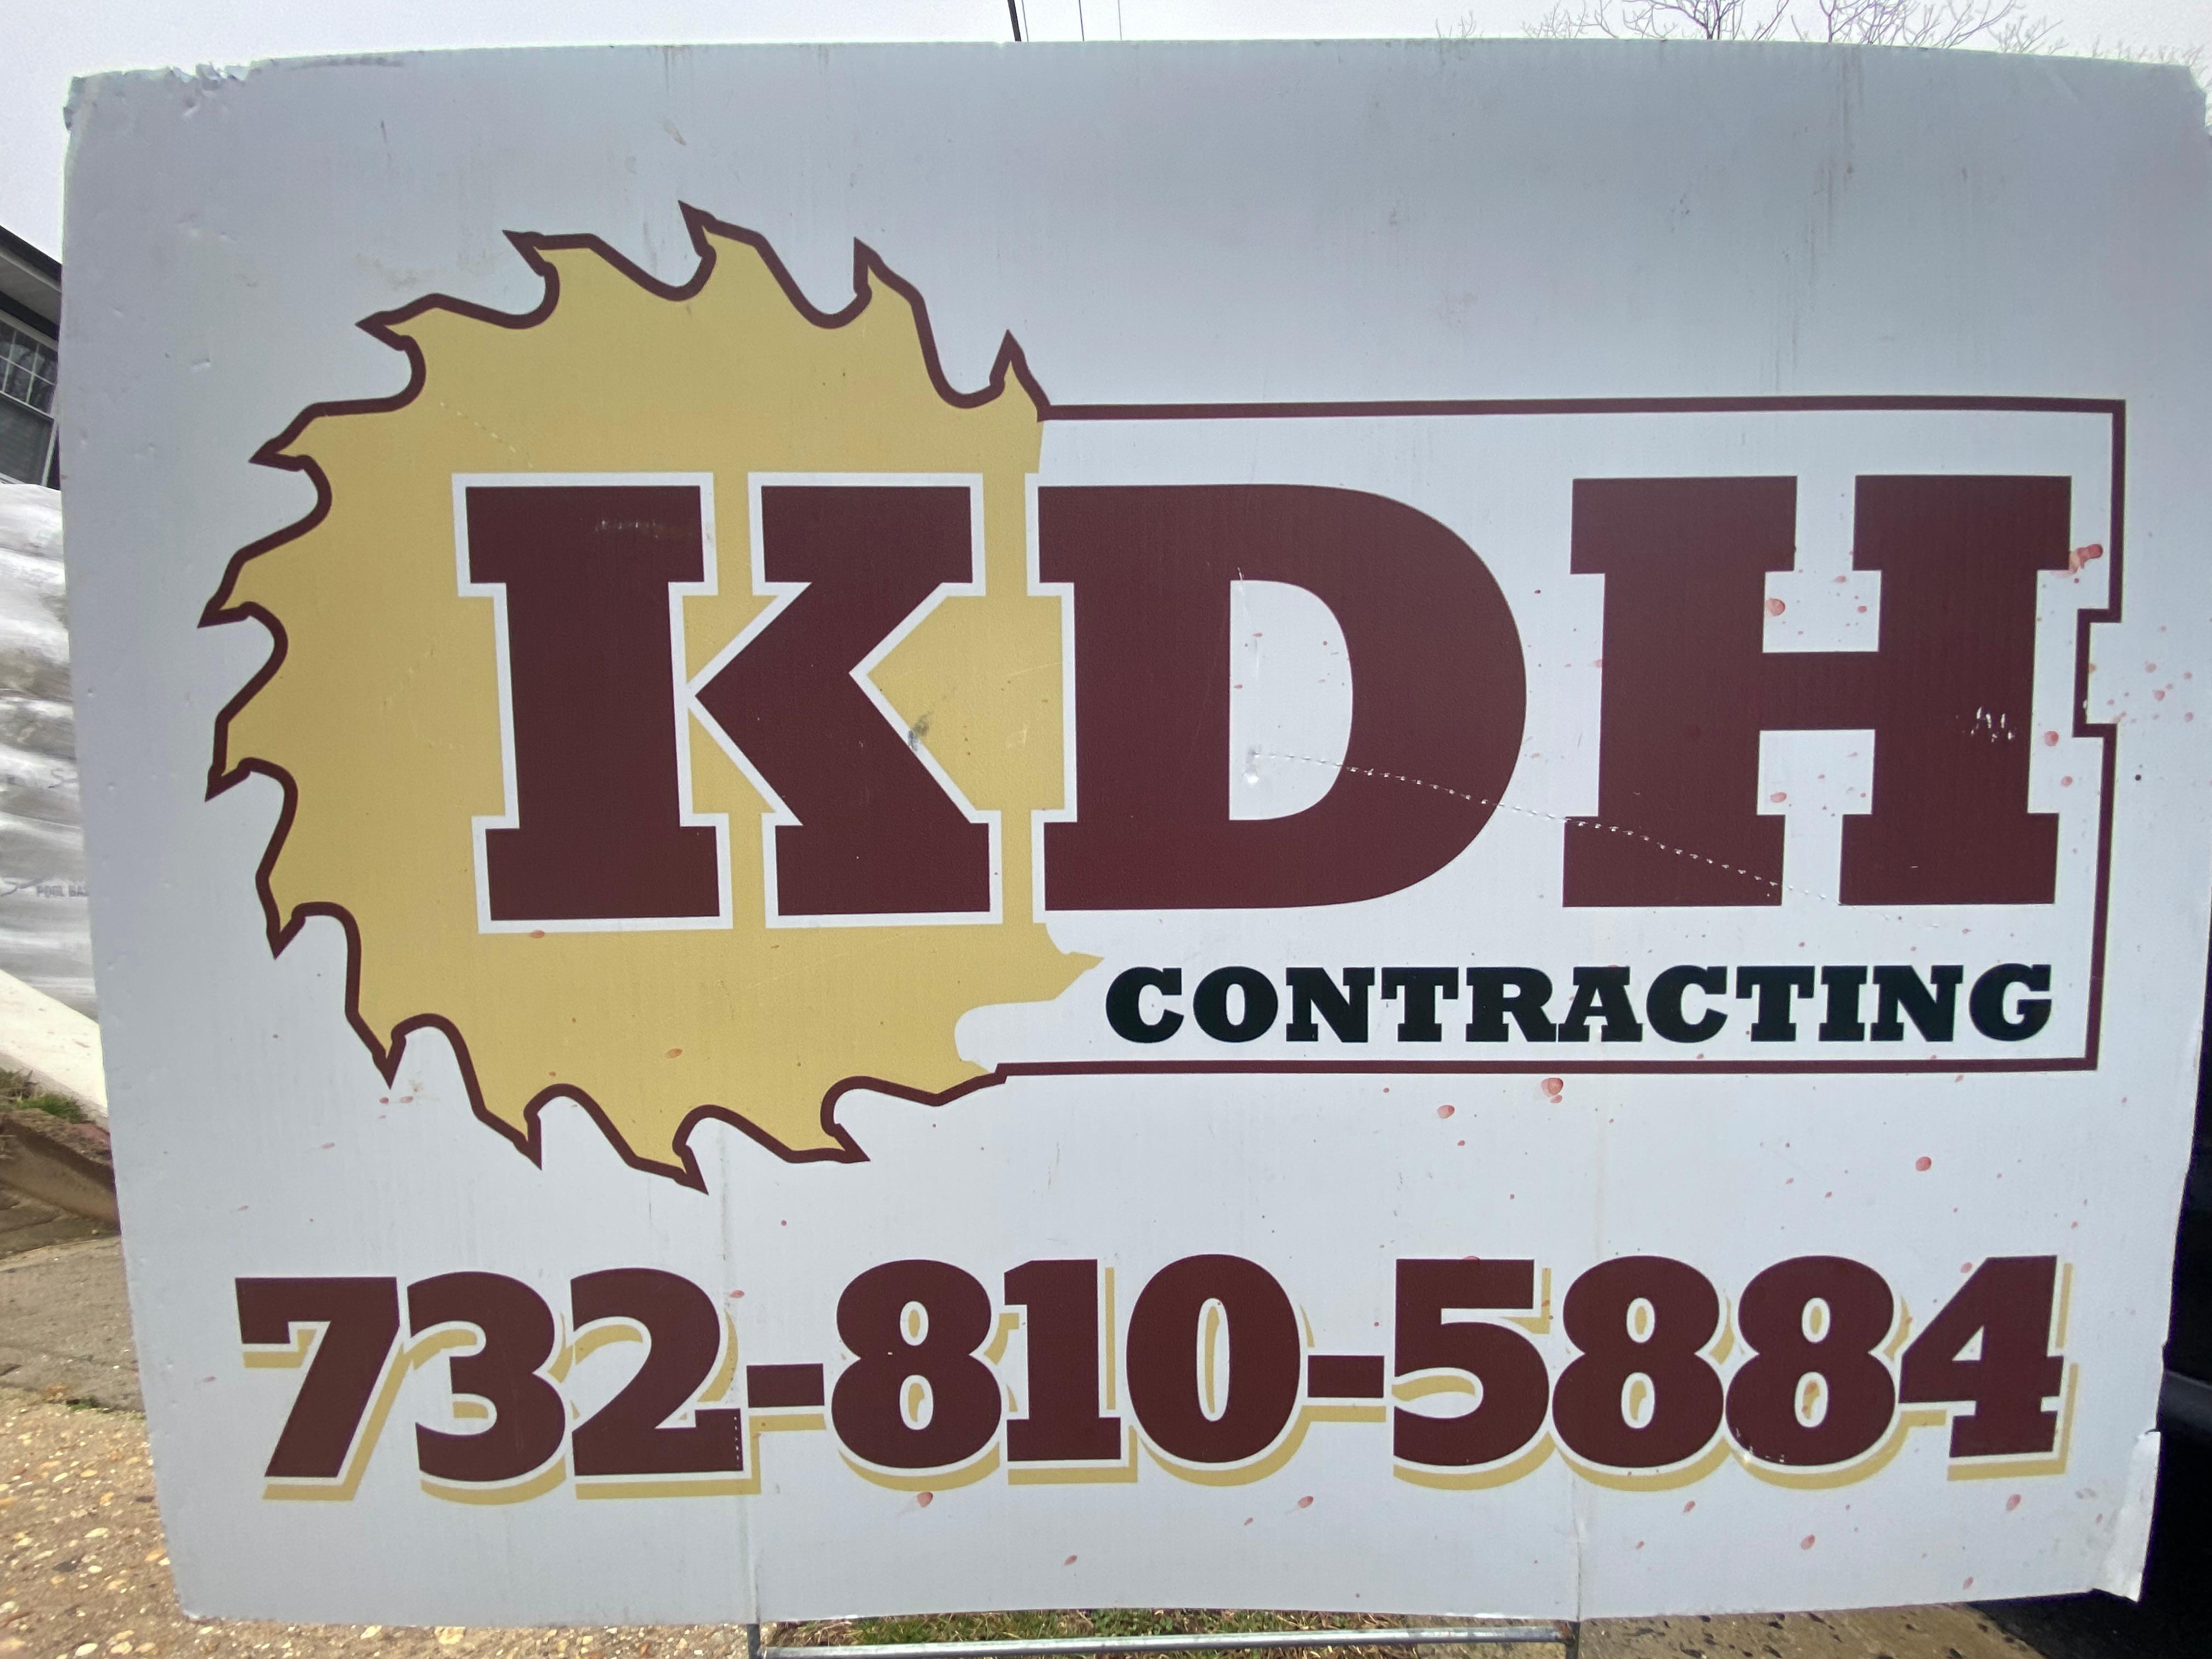 KDH Contracting LLC specializes in kitchen remodeling projects. We work closely with you to revitalize your kitchen, providing innovative designs and high-quality renovations that cater to your lifestyle and preferences.